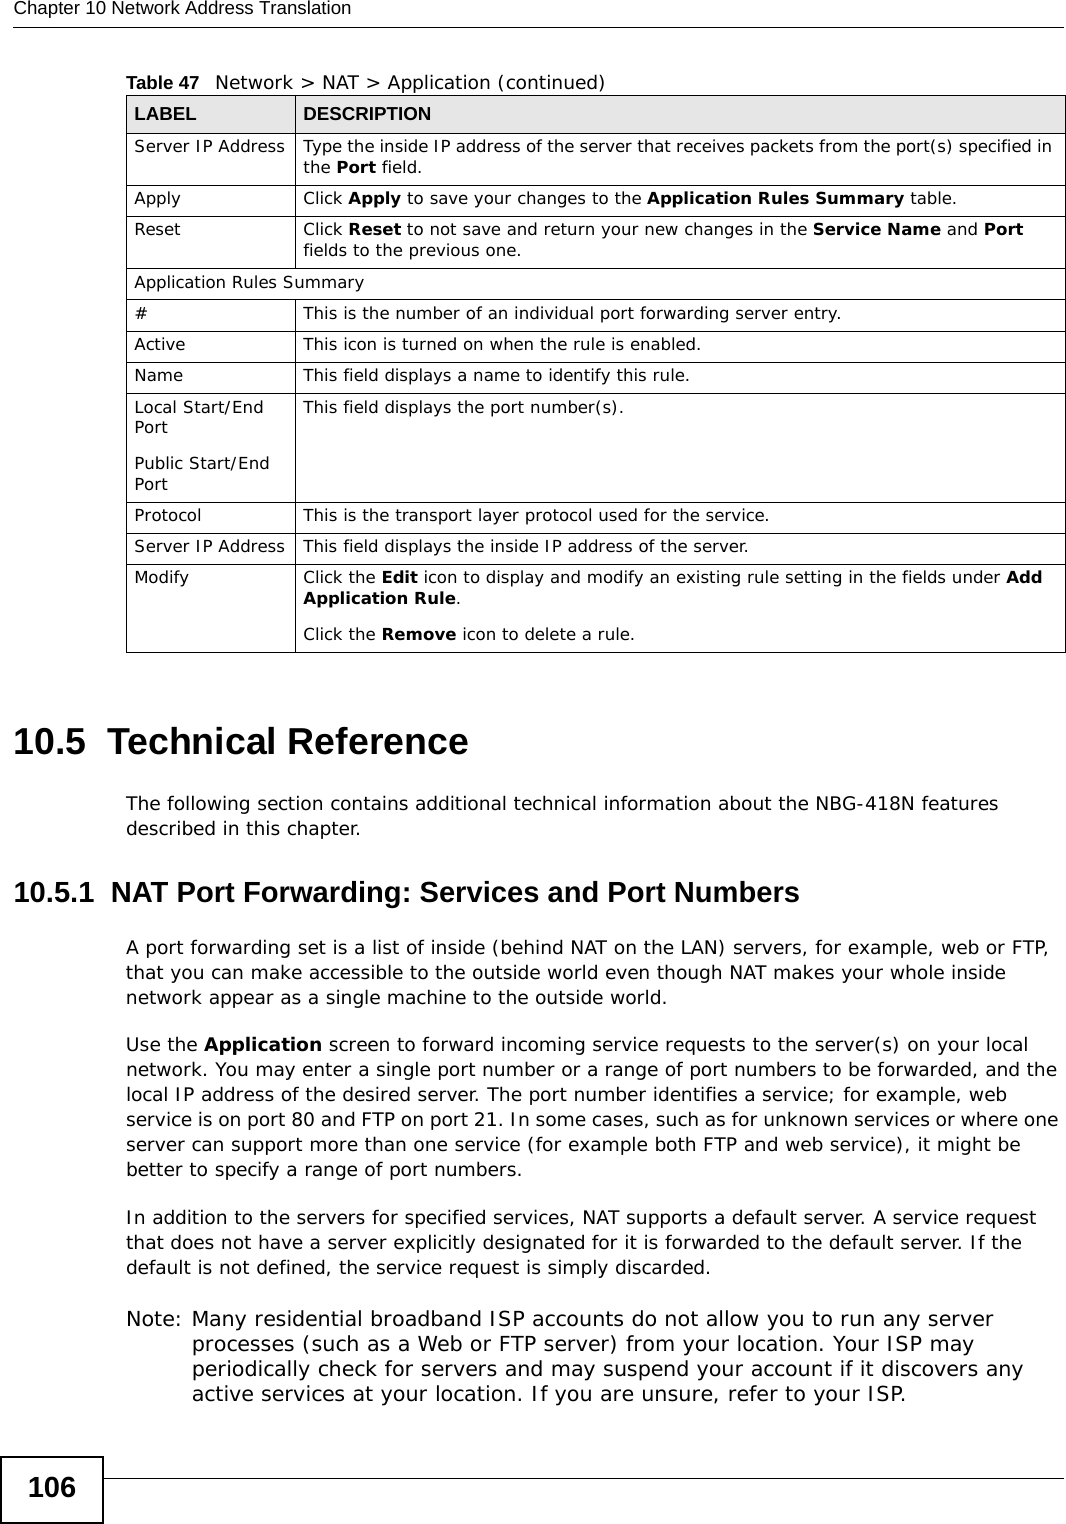 Chapter 10 Network Address Translation10610.5  Technical ReferenceThe following section contains additional technical information about the NBG-418N features described in this chapter.10.5.1  NAT Port Forwarding: Services and Port NumbersA port forwarding set is a list of inside (behind NAT on the LAN) servers, for example, web or FTP, that you can make accessible to the outside world even though NAT makes your whole inside network appear as a single machine to the outside world. Use the Application screen to forward incoming service requests to the server(s) on your local network. You may enter a single port number or a range of port numbers to be forwarded, and the local IP address of the desired server. The port number identifies a service; for example, web service is on port 80 and FTP on port 21. In some cases, such as for unknown services or where one server can support more than one service (for example both FTP and web service), it might be better to specify a range of port numbers.In addition to the servers for specified services, NAT supports a default server. A service request that does not have a server explicitly designated for it is forwarded to the default server. If the default is not defined, the service request is simply discarded.Note: Many residential broadband ISP accounts do not allow you to run any server processes (such as a Web or FTP server) from your location. Your ISP may periodically check for servers and may suspend your account if it discovers any active services at your location. If you are unsure, refer to your ISP.Server IP Address Type the inside IP address of the server that receives packets from the port(s) specified in the Port field.Apply Click Apply to save your changes to the Application Rules Summary table.Reset Click Reset to not save and return your new changes in the Service Name and Port fields to the previous one.Application Rules Summary#This is the number of an individual port forwarding server entry.Active This icon is turned on when the rule is enabled. Name This field displays a name to identify this rule.Local Start/End PortPublic Start/End PortThis field displays the port number(s). Protocol This is the transport layer protocol used for the service.Server IP Address This field displays the inside IP address of the server.Modify Click the Edit icon to display and modify an existing rule setting in the fields under Add Application Rule. Click the Remove icon to delete a rule.Table 47   Network &gt; NAT &gt; Application (continued)LABEL DESCRIPTION